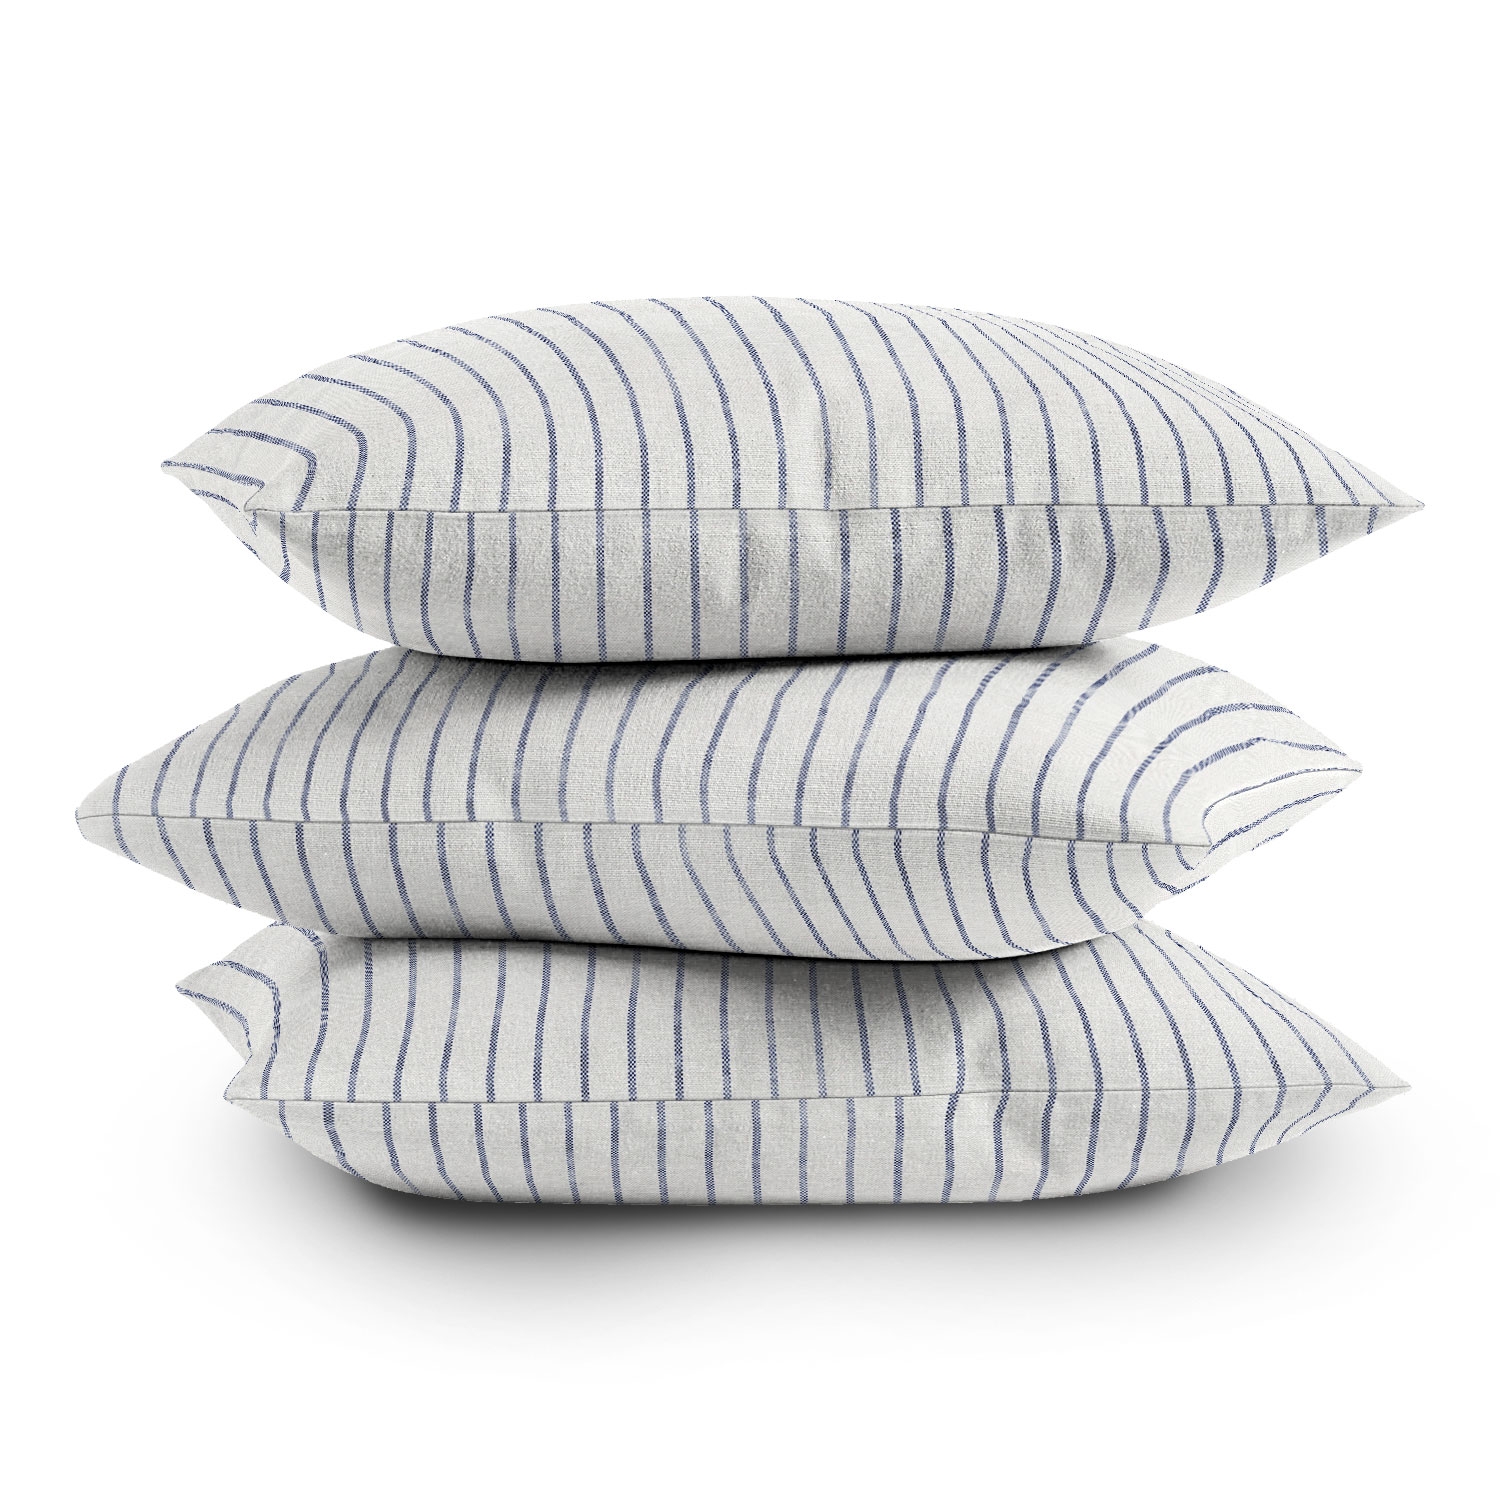 Aegean Wide Stripe by Holli Zollinger - Outdoor Throw Pillow 20" x 20" - Image 2